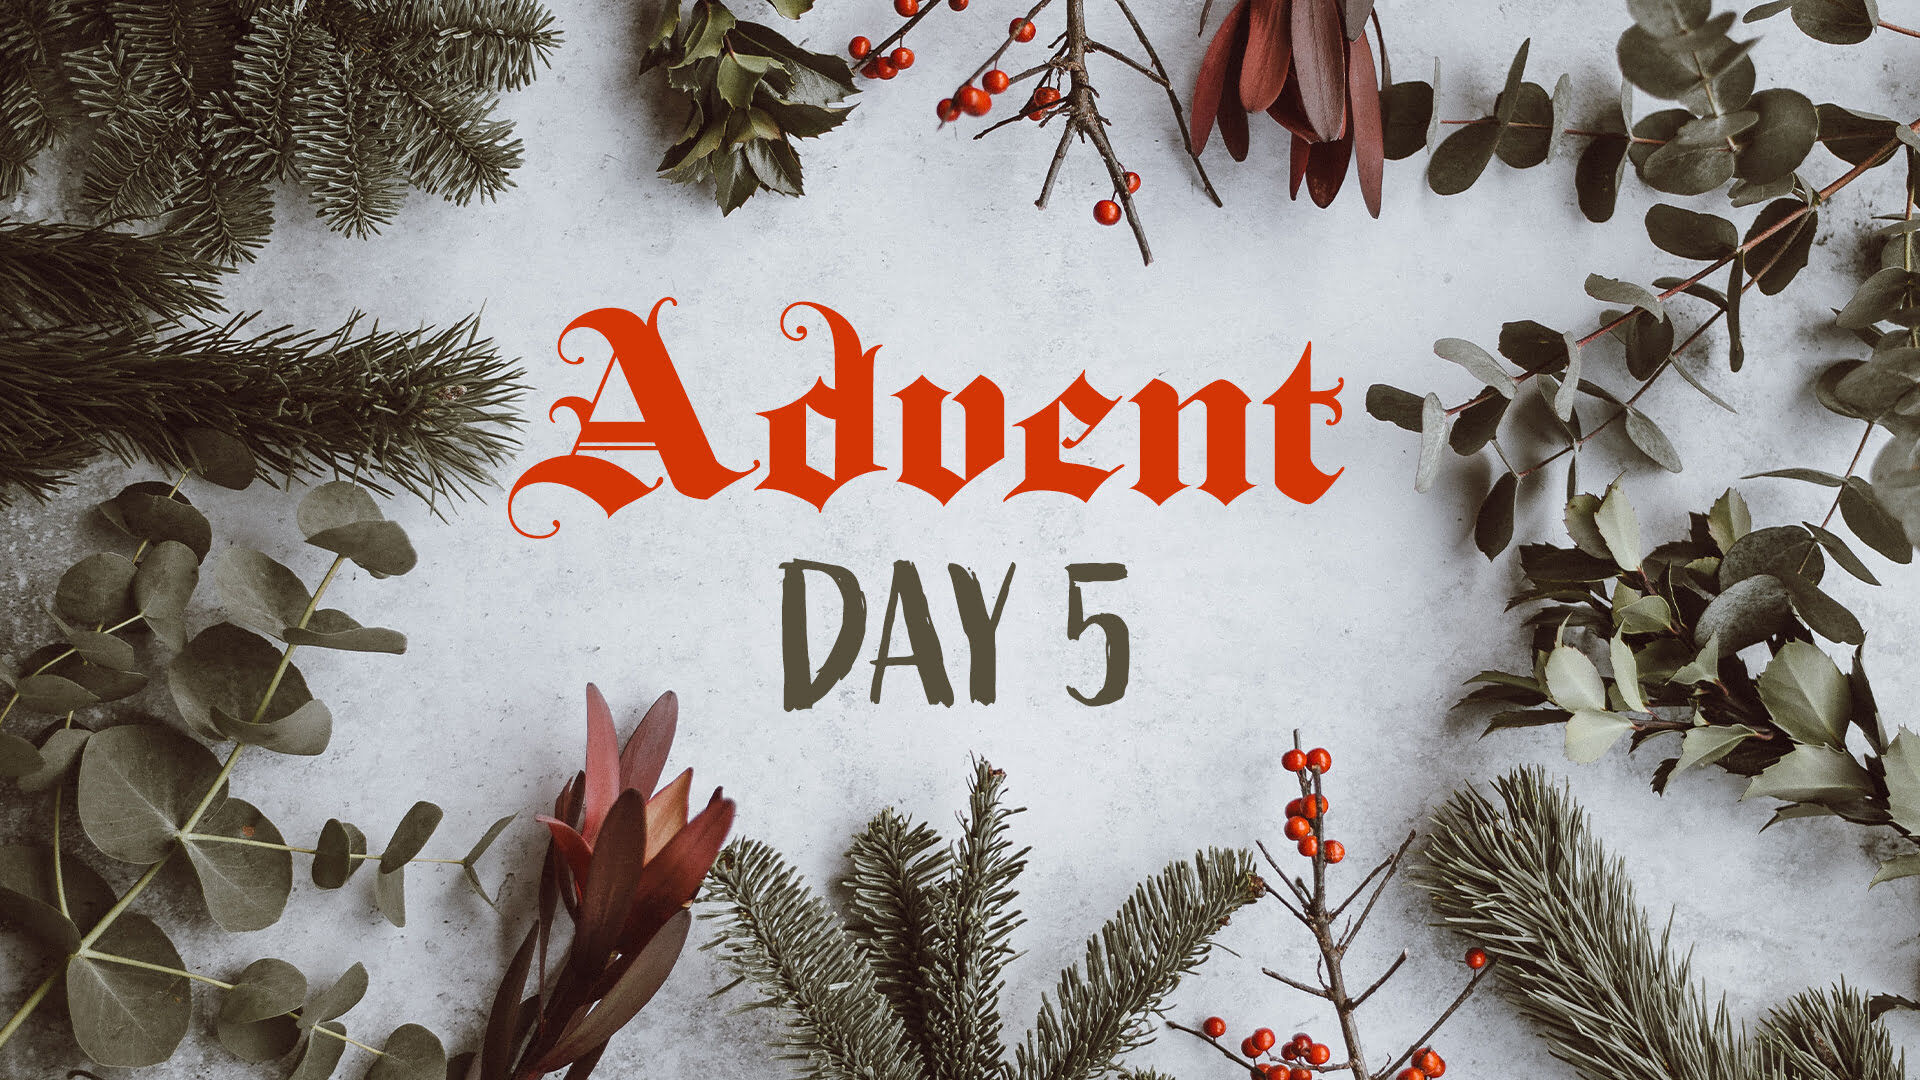 hillside-church-article-img-advent-day-5